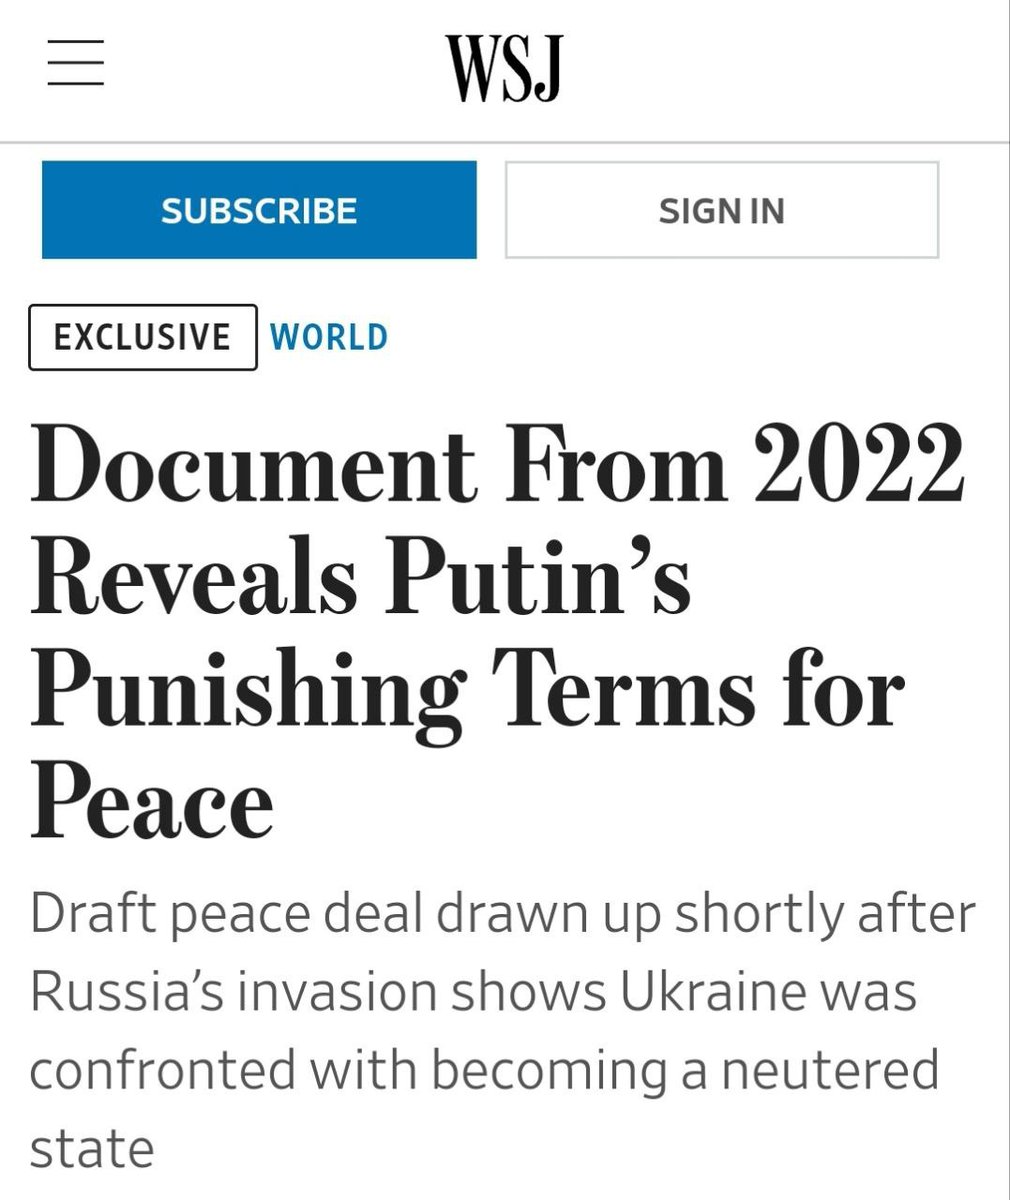 The Wall Street Journal publishes the 'punishing peace terms' of Russia for Ukraine at the draft peace negotiations in 2022. Key points of the deal include: ◾ Ukraine potentially joining the EU but not military alliances like NATO ◾Crimea remaining under unconditional